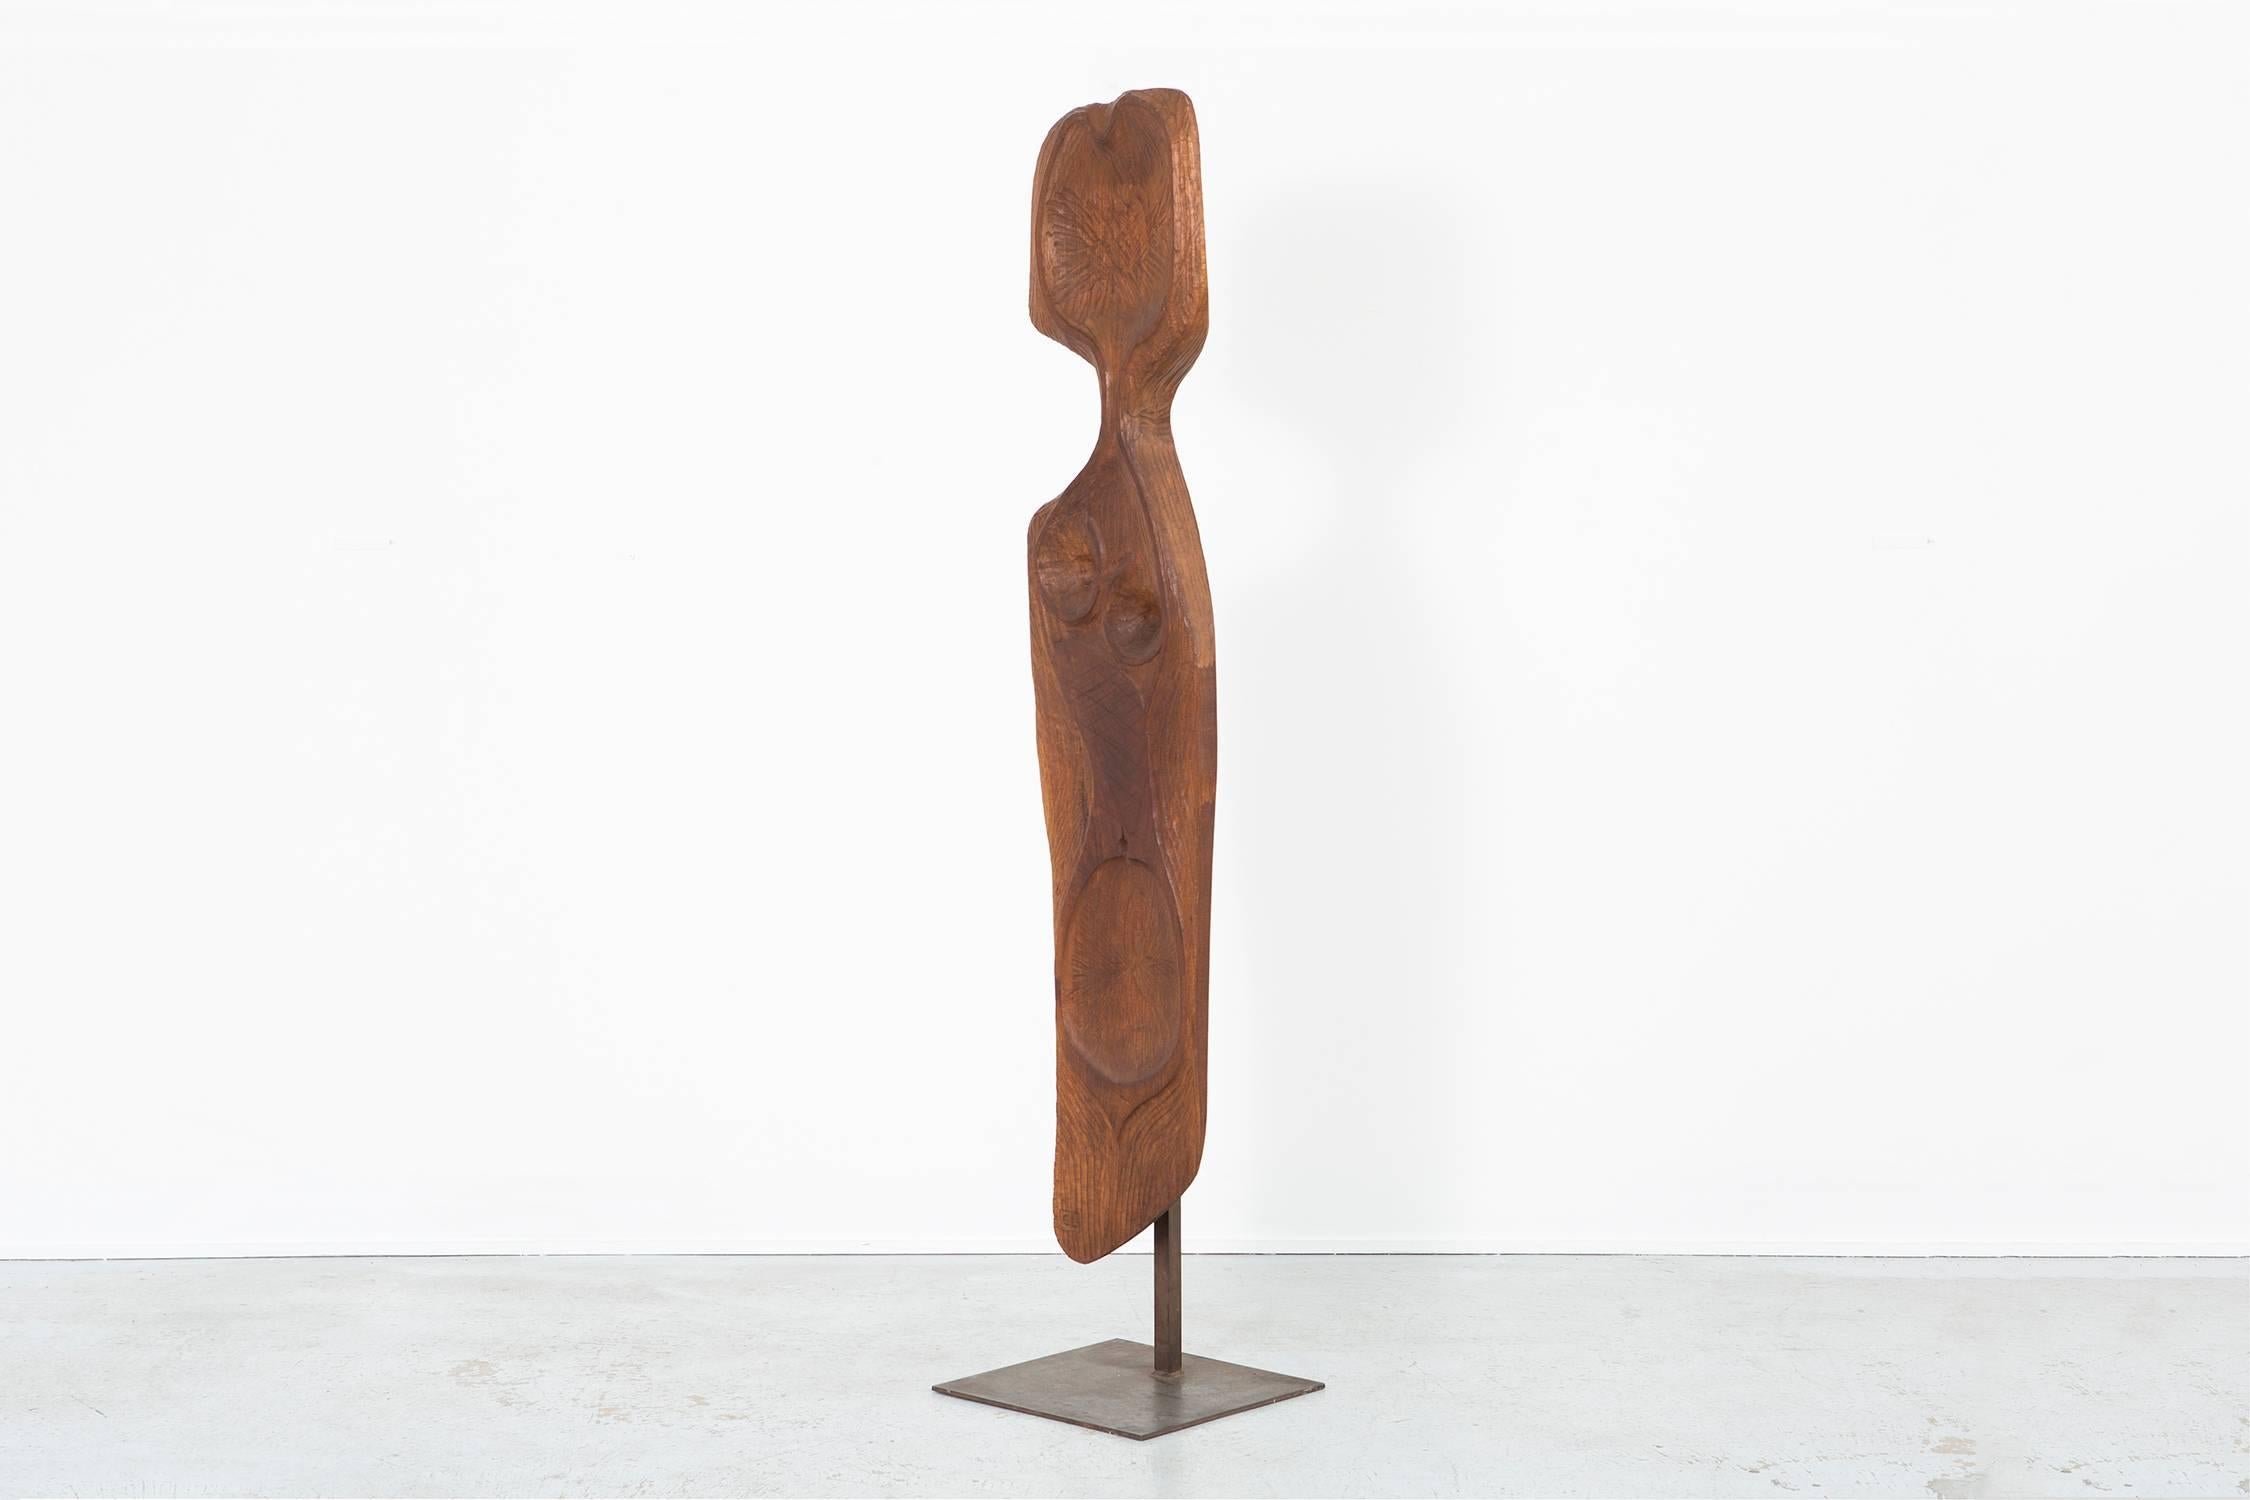 Sculpture

by Charles Law

USA, circa 1969

walnut and metal

Measures: 64 ½” H x 14” W x 14” D.